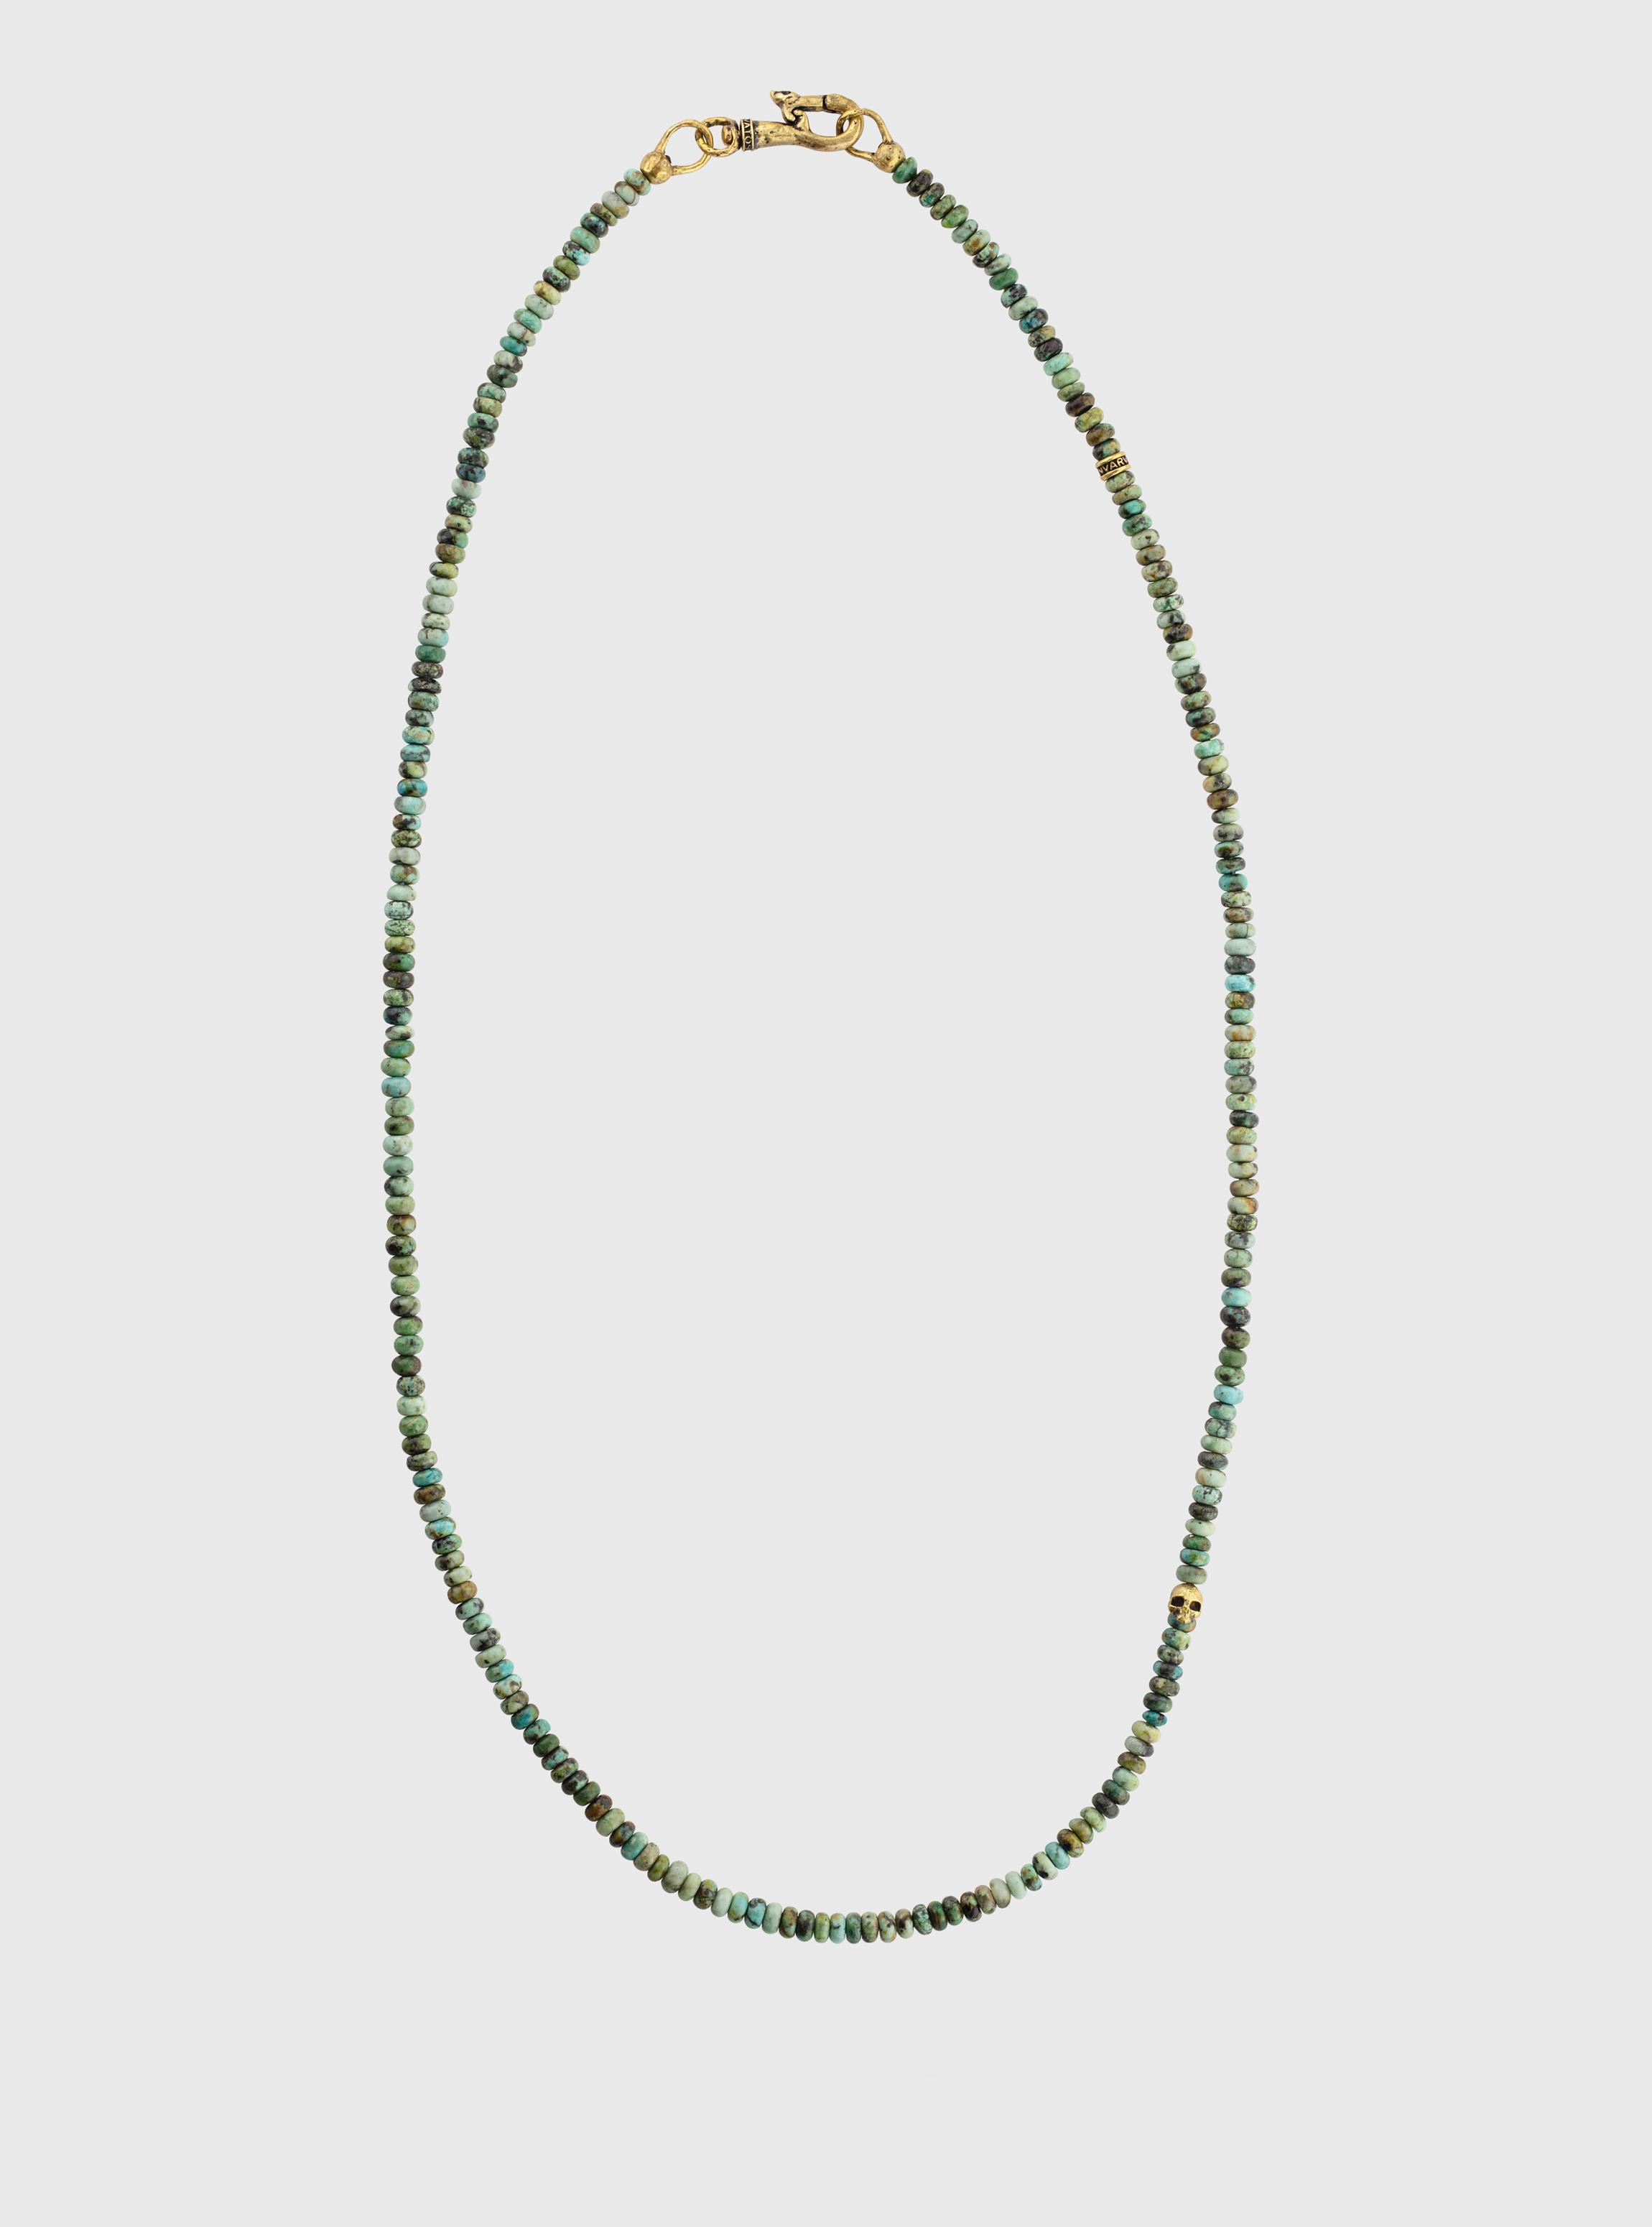 Big Bead necklace in Blue - J. McVeigh Jewelry